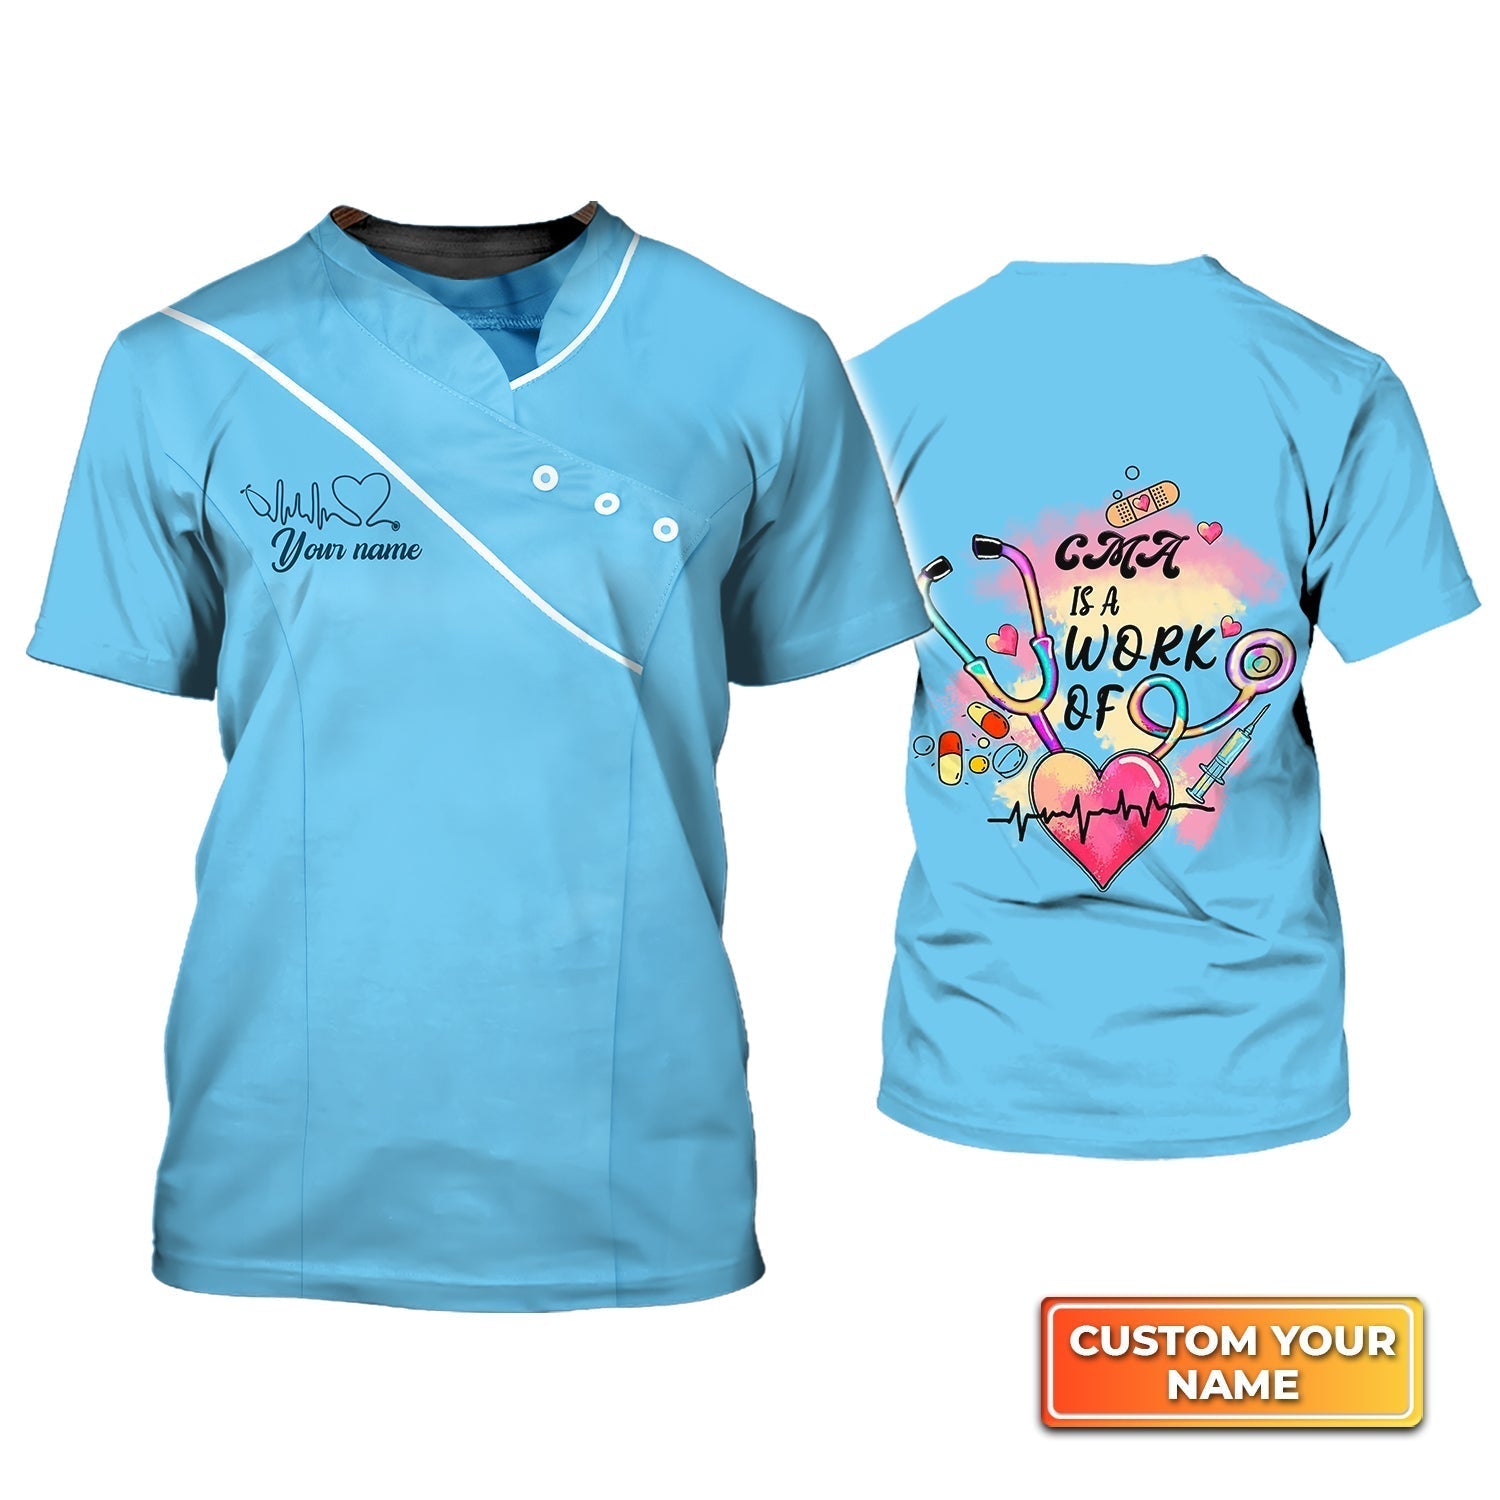 Personalized Name 3D Tshirt Blue Cma Shirt Cma Is A Work Of Heart Registered Nurse